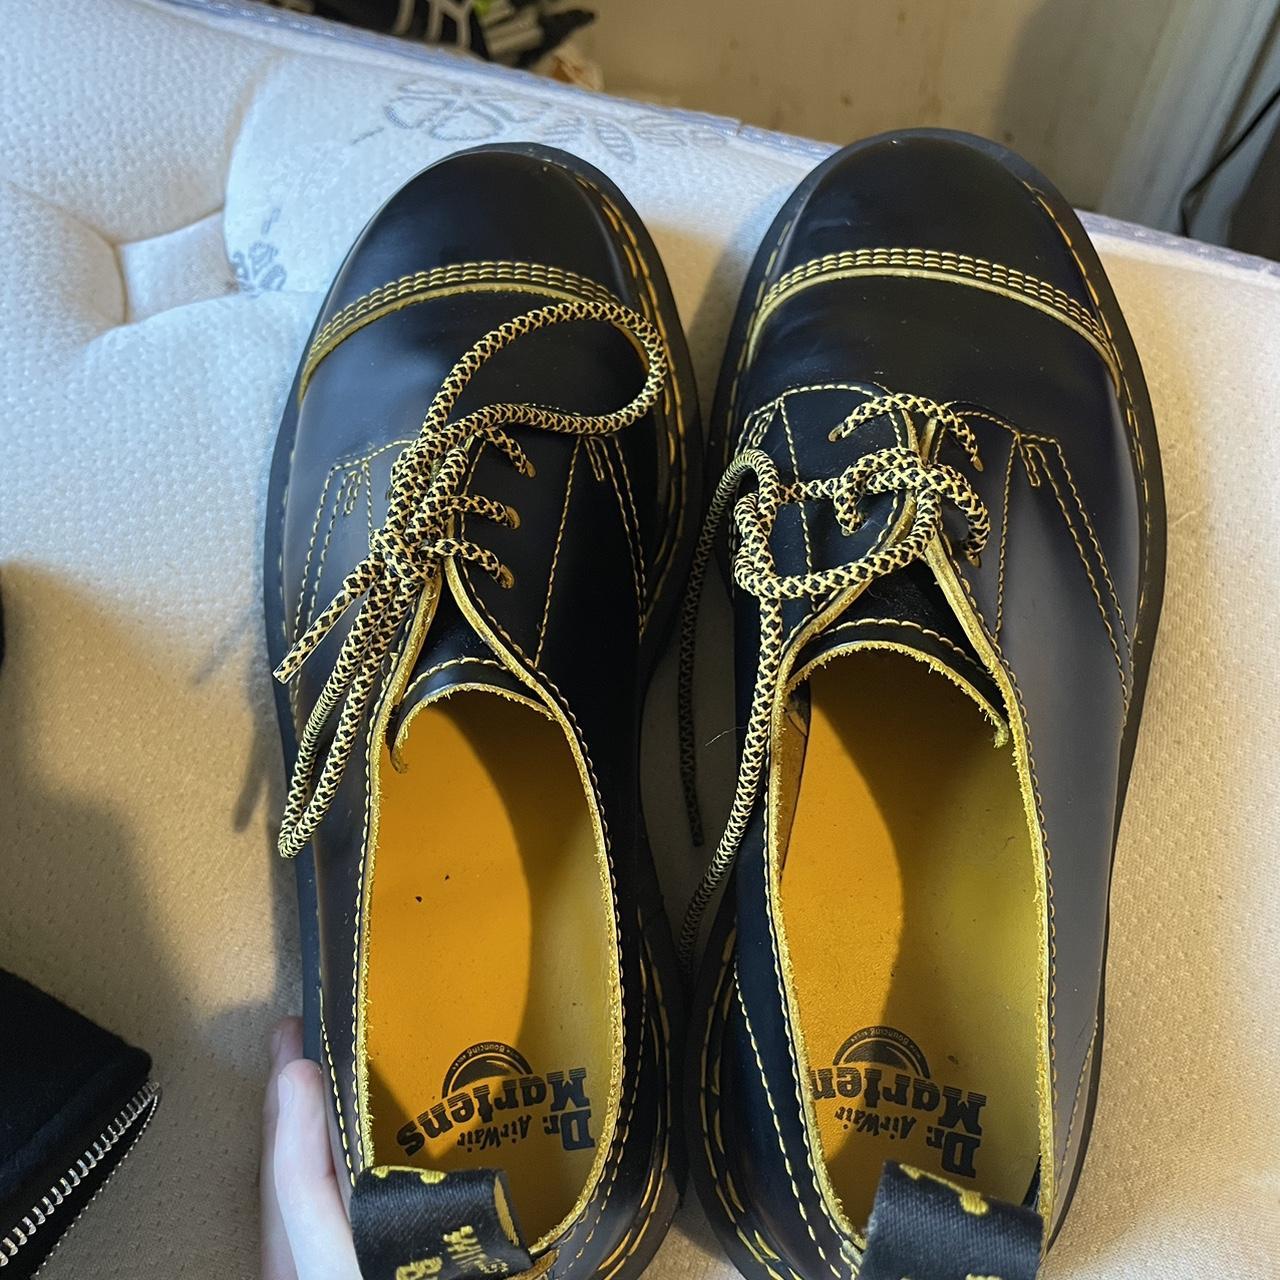 Dr. Martens Men's Black and Yellow Oxfords (2)